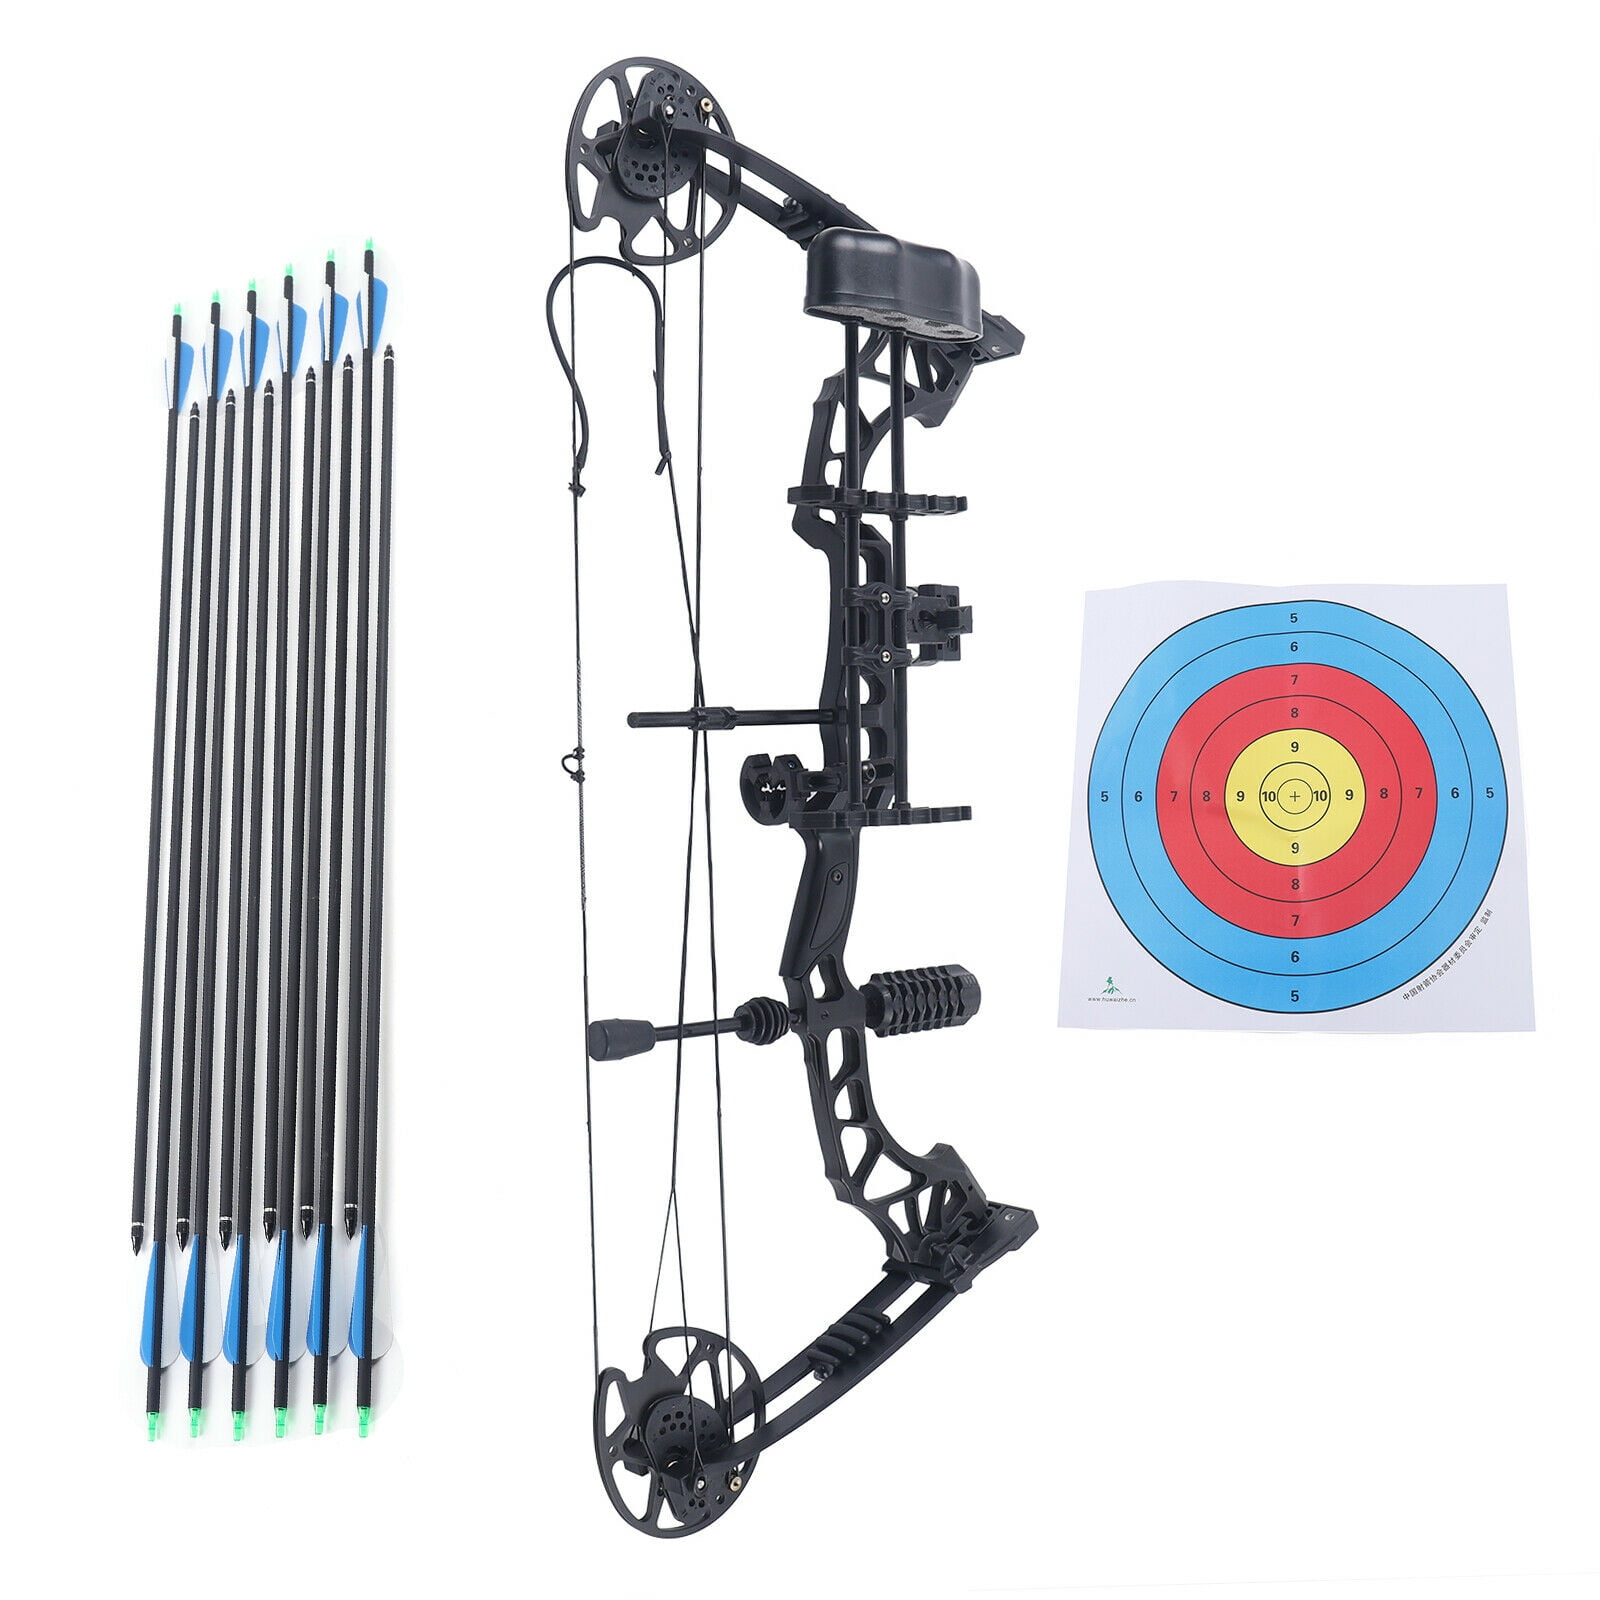 20-70lbs Pro Compound Right Hand Bow Kit Archery Arrow Target Hunting Camo Set 